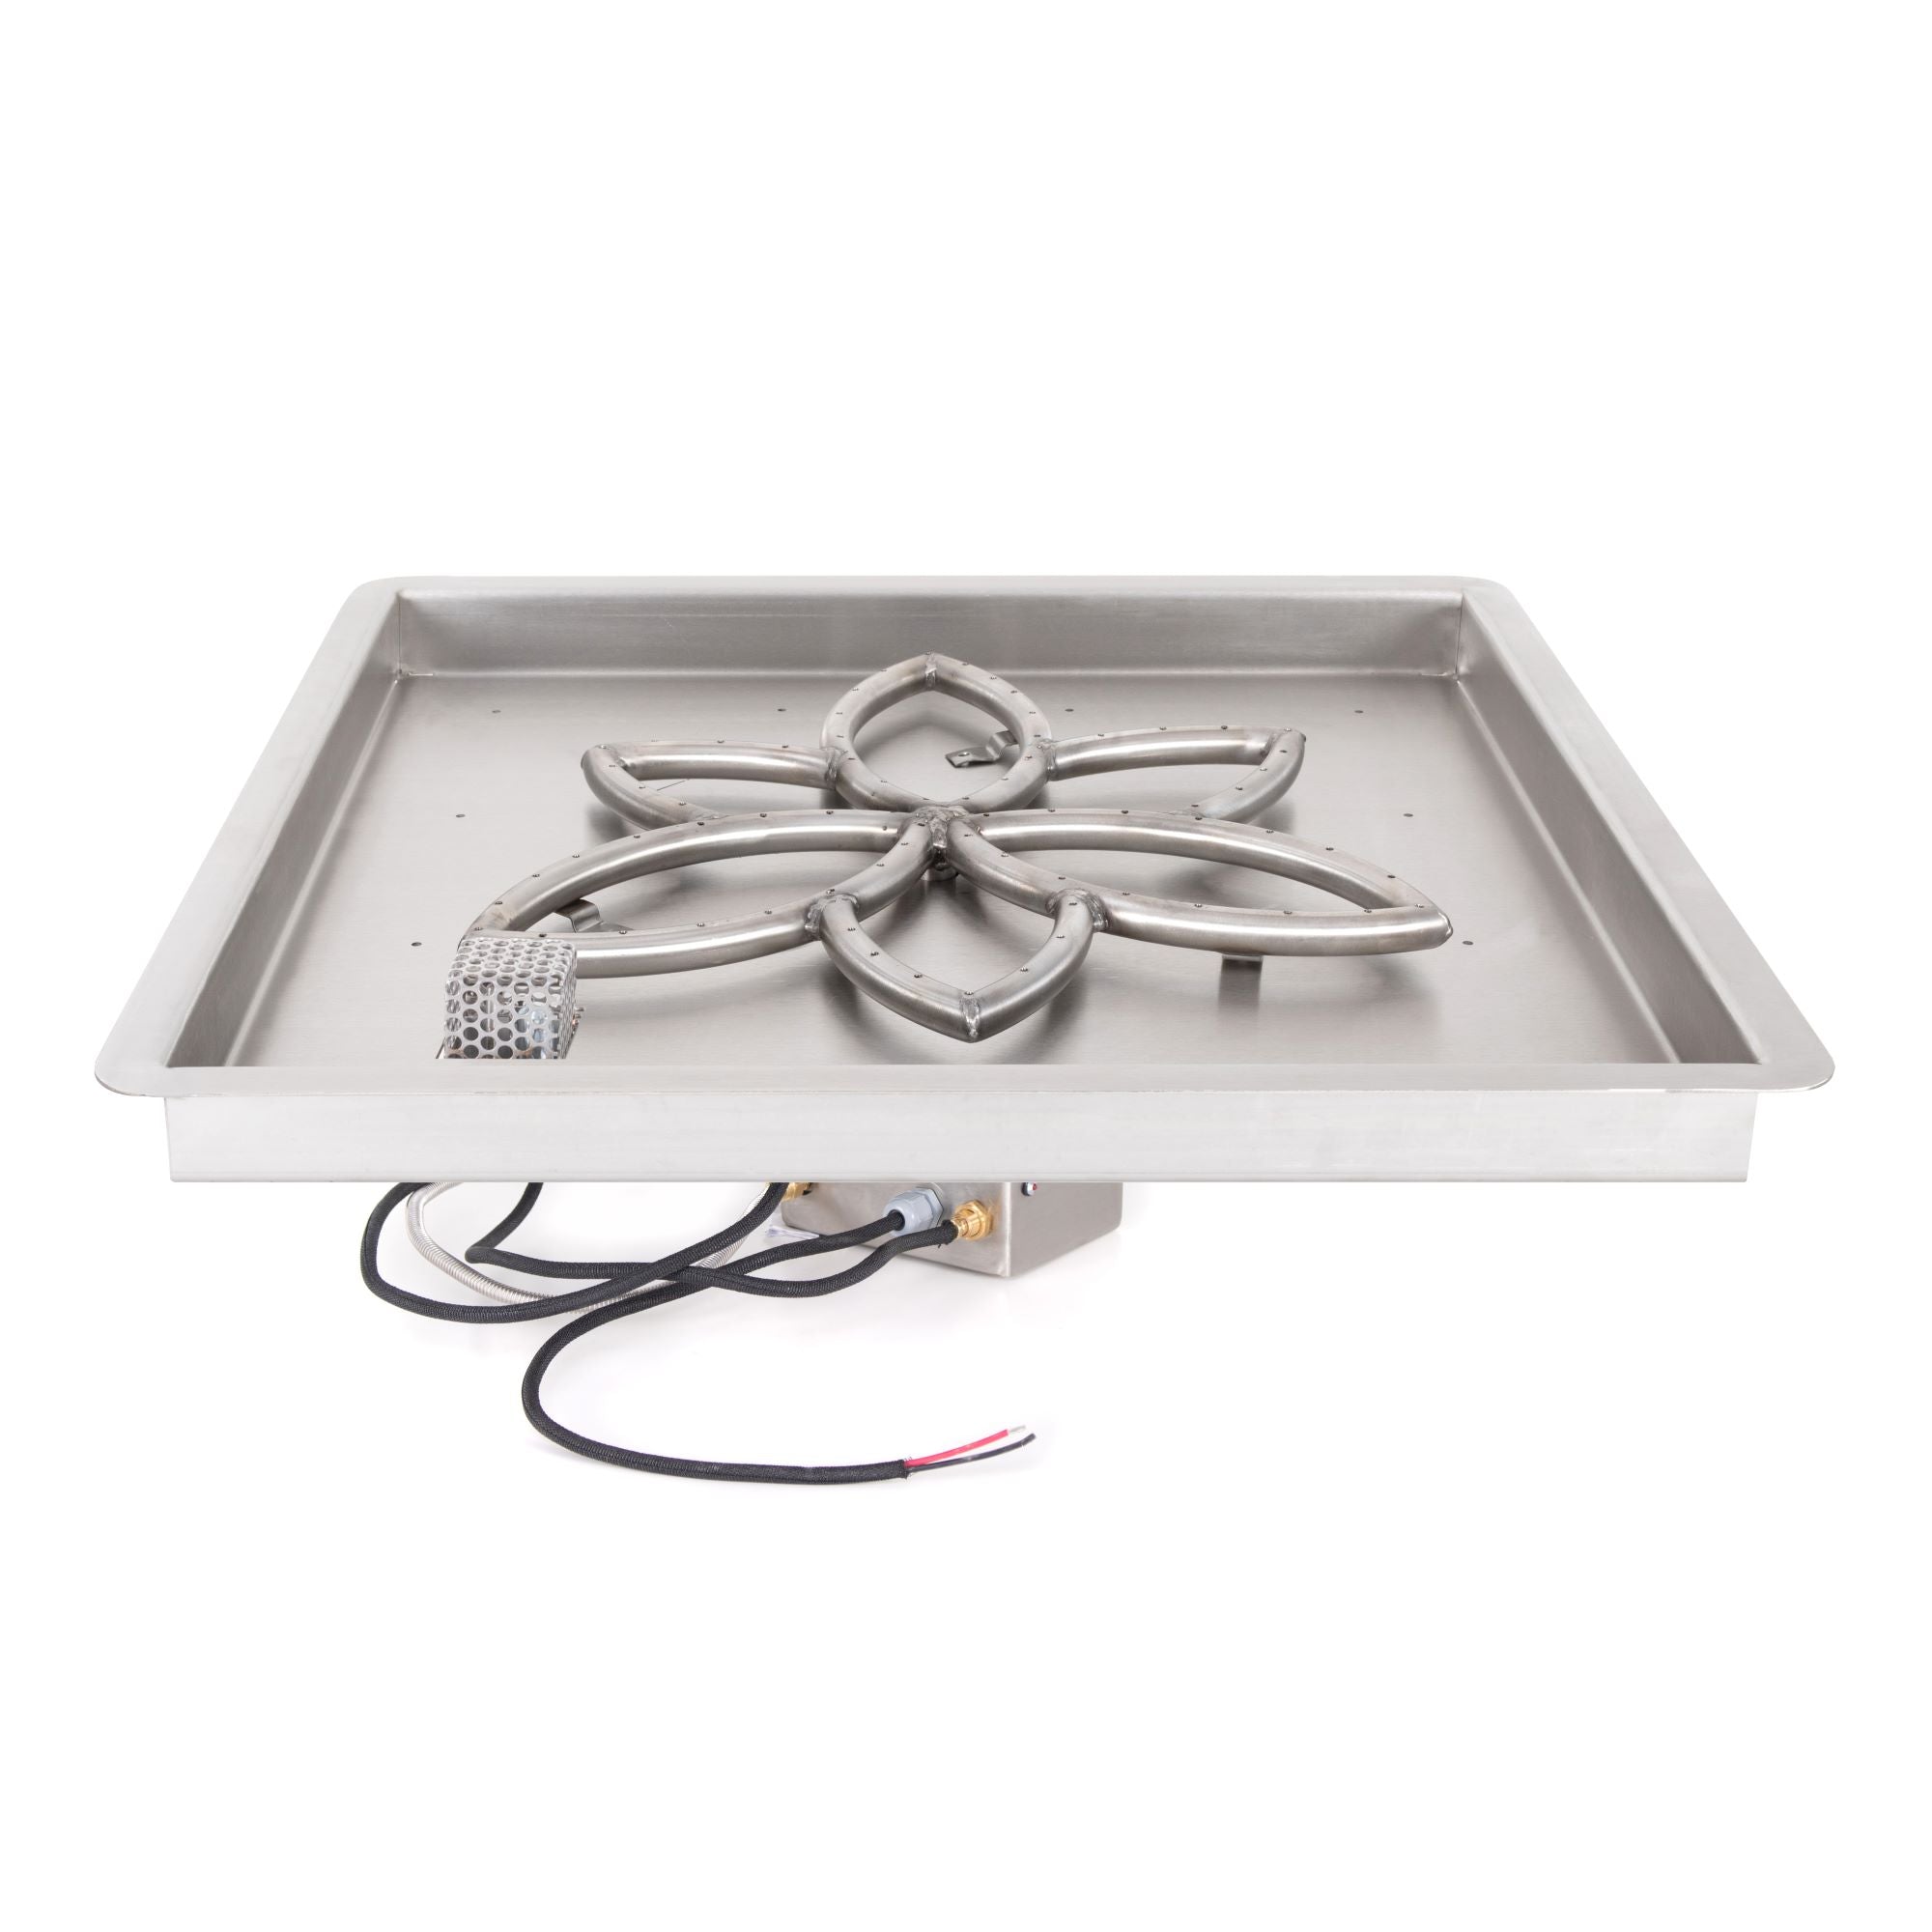 The Outdoor Plus Square Drop-in Pan with Stainless Steel Lotus Burner